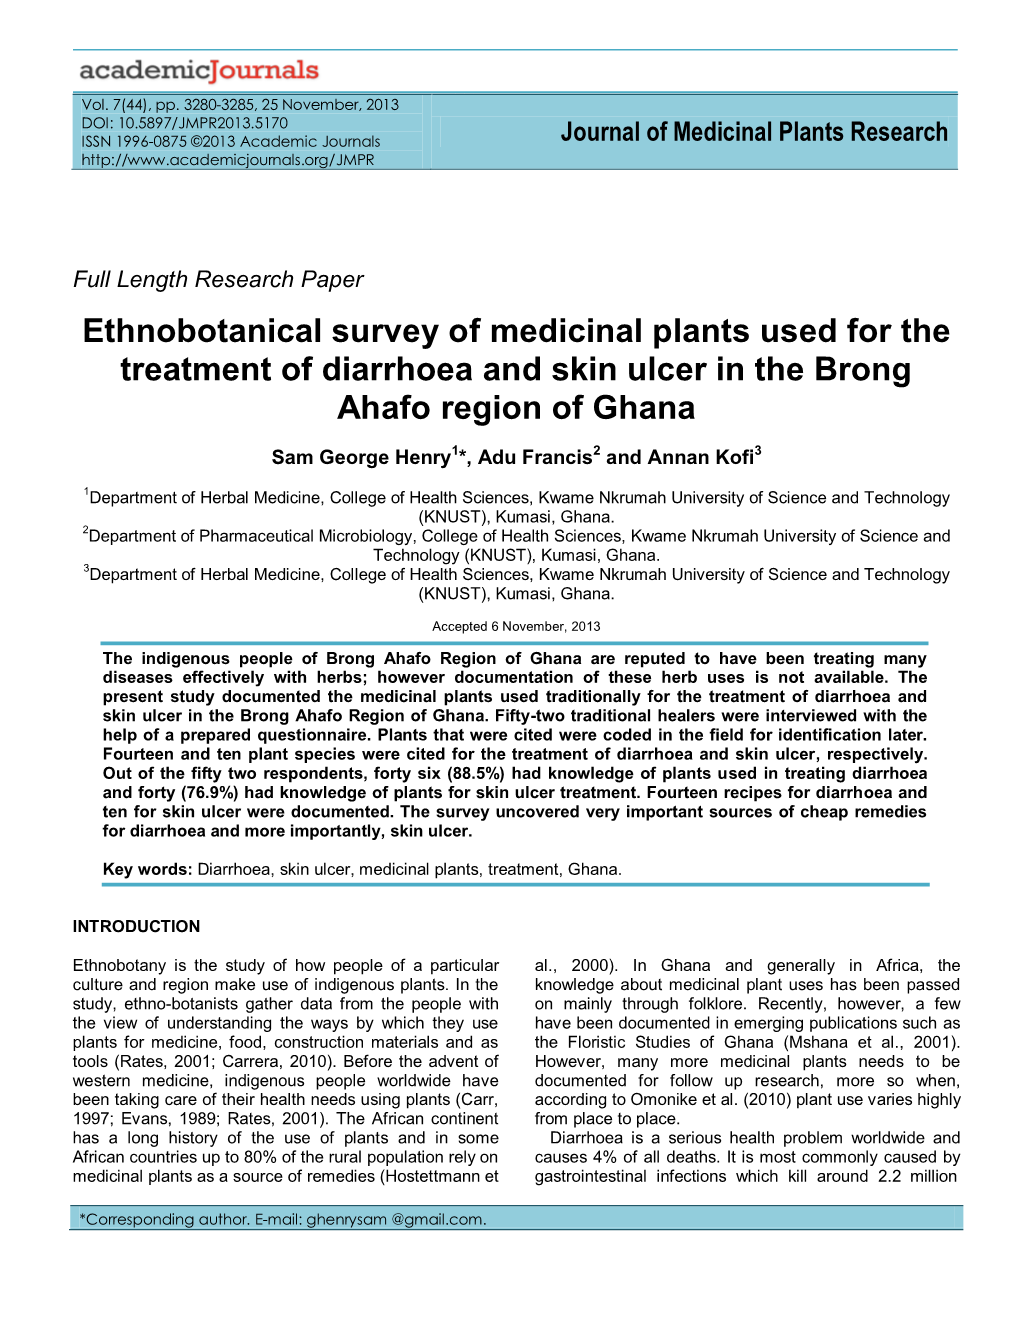 Ethnobotanical Survey of Medicinal Plants Used for the Treatment of Diarrhoea and Skin Ulcer in the Brong Ahafo Region of Ghana